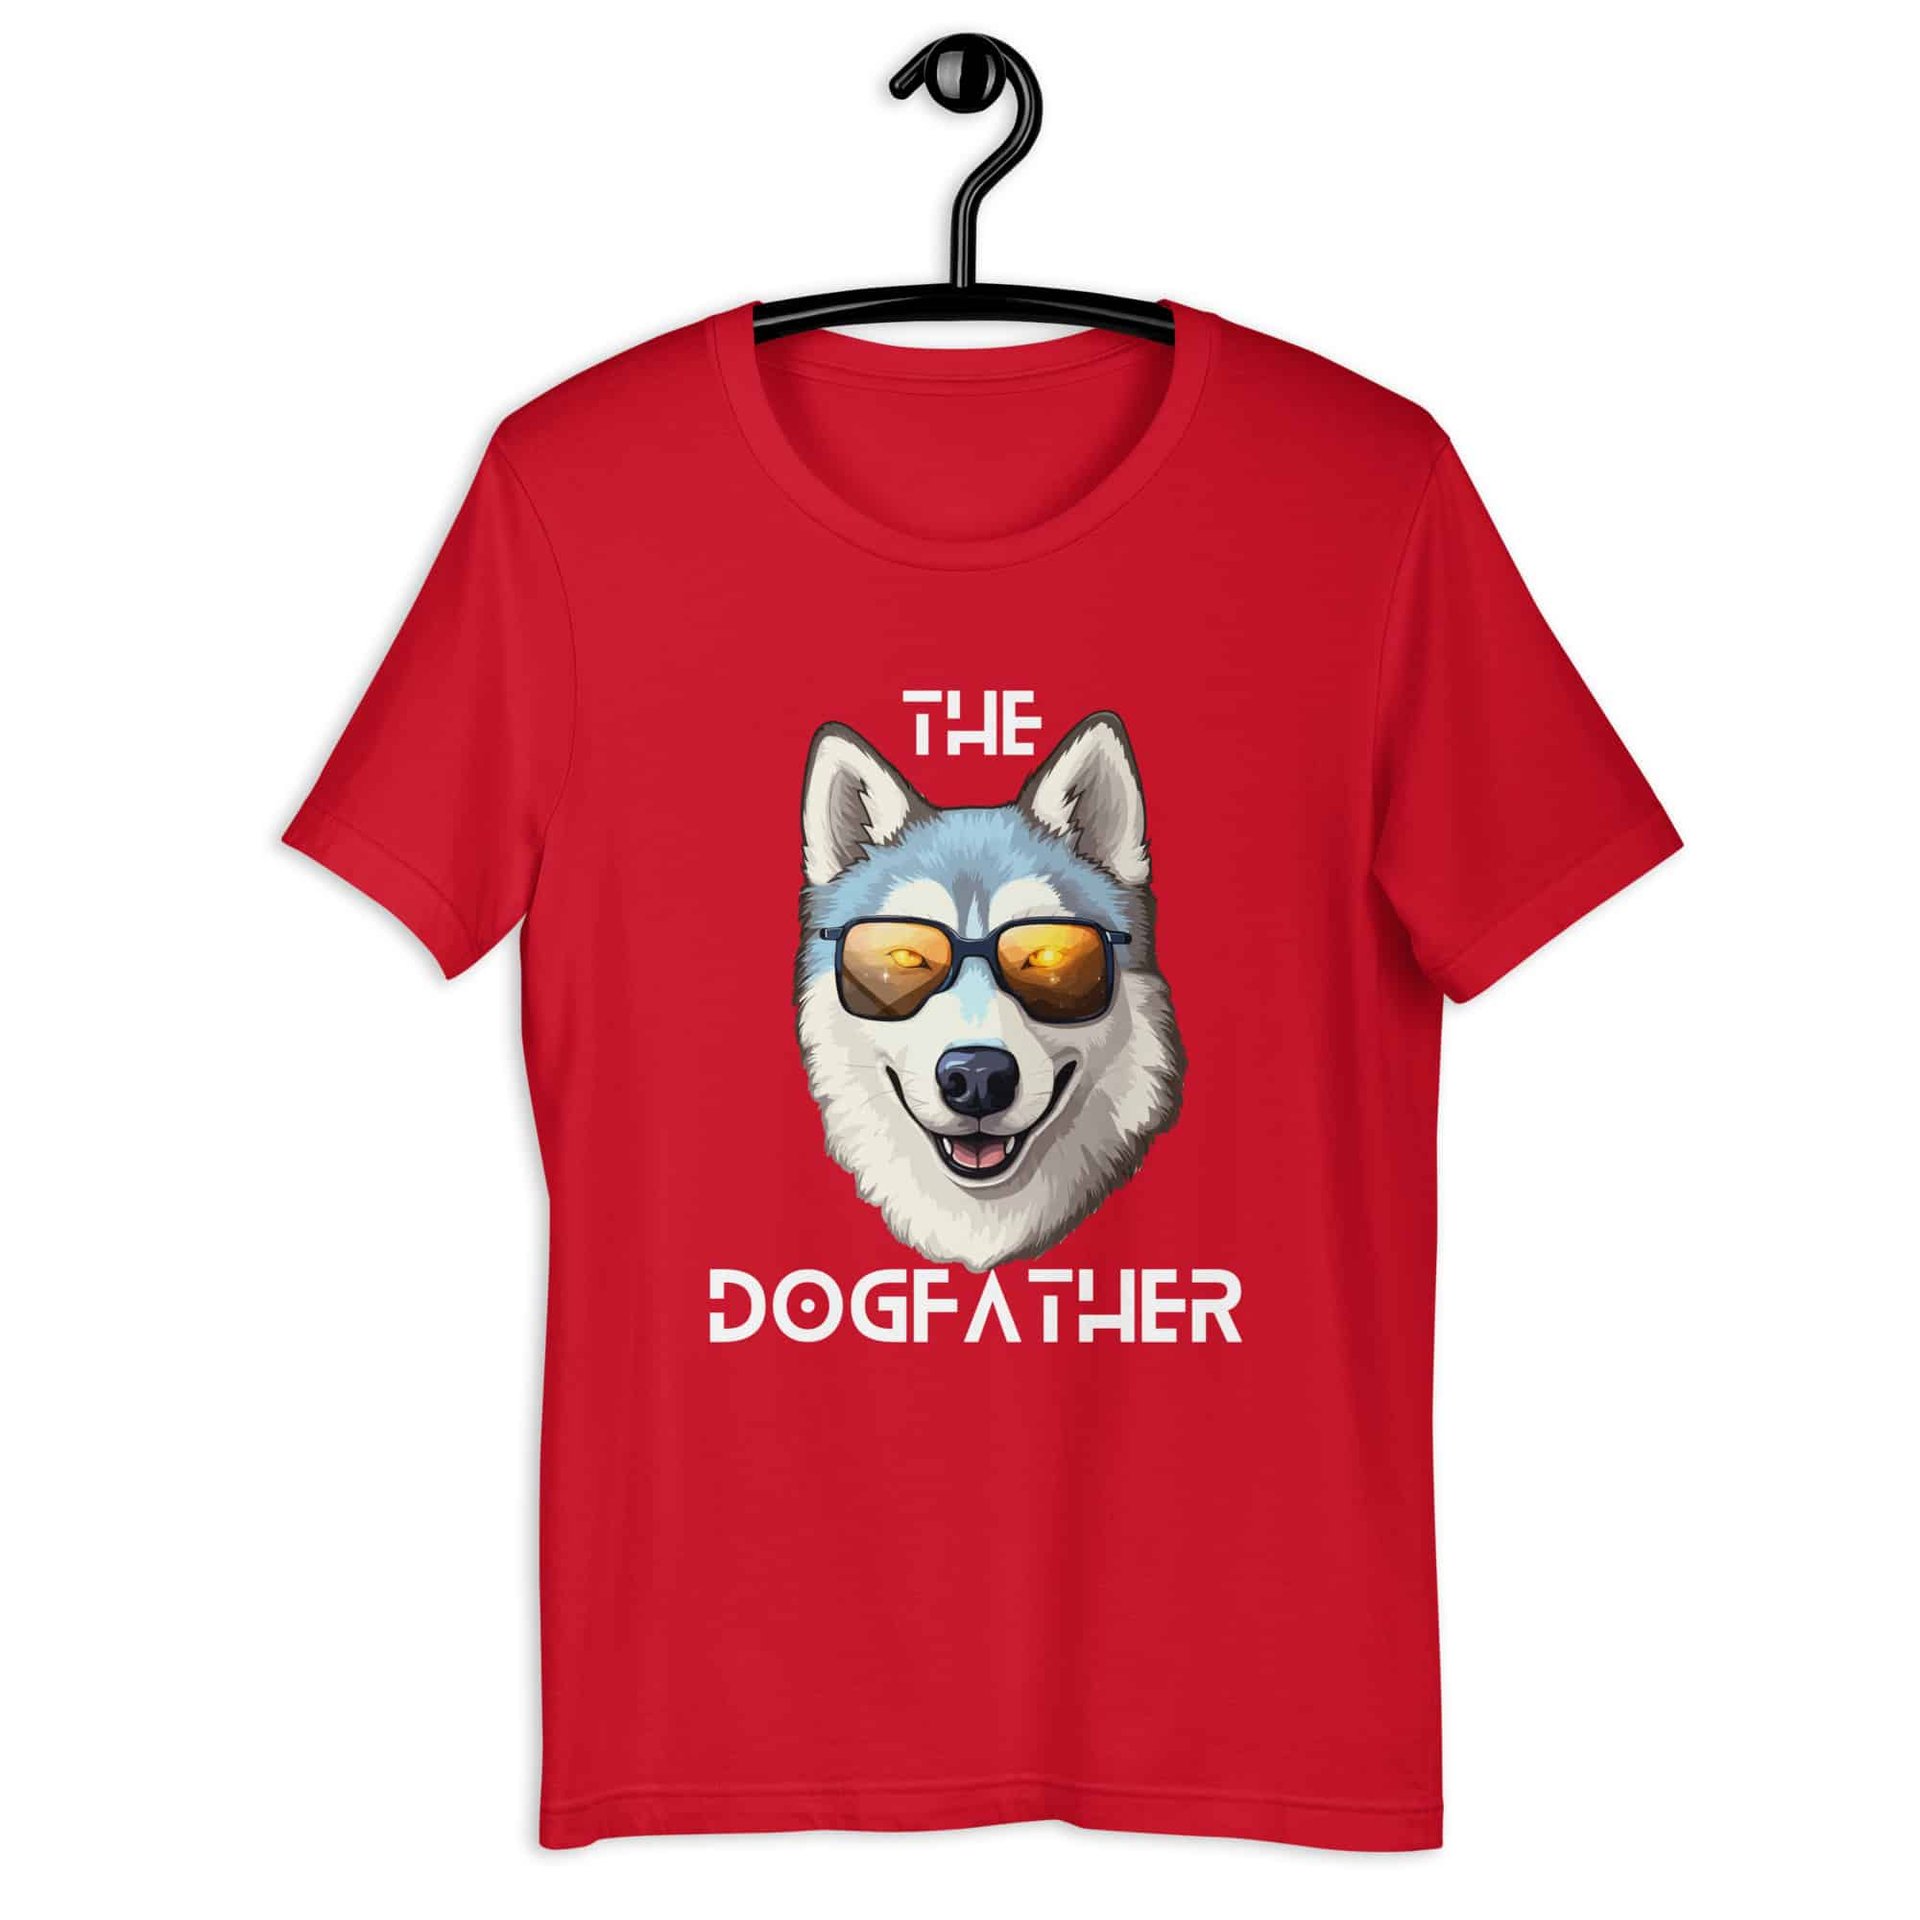 The Dogfather Huskies Unisex T-Shirt. Red